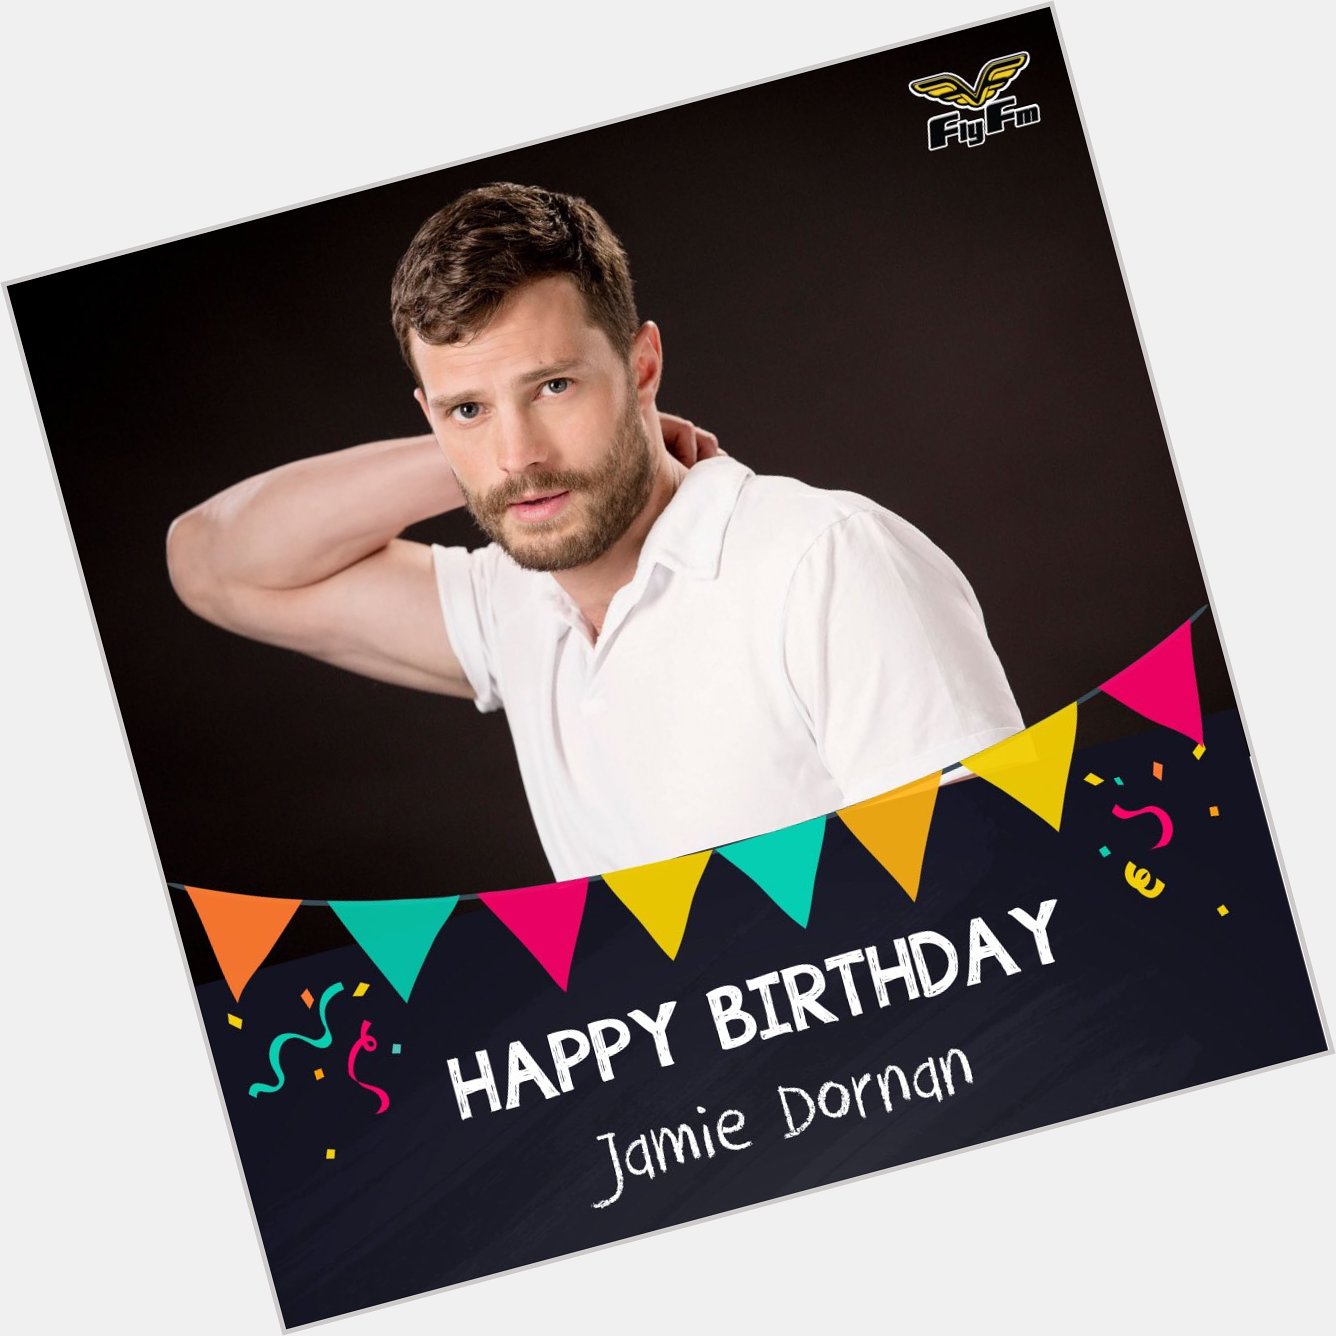 Well someone\s turning a shade greyer today! A very HAPPY 35th BIRTHDAY Jamie Dornan!!  s 